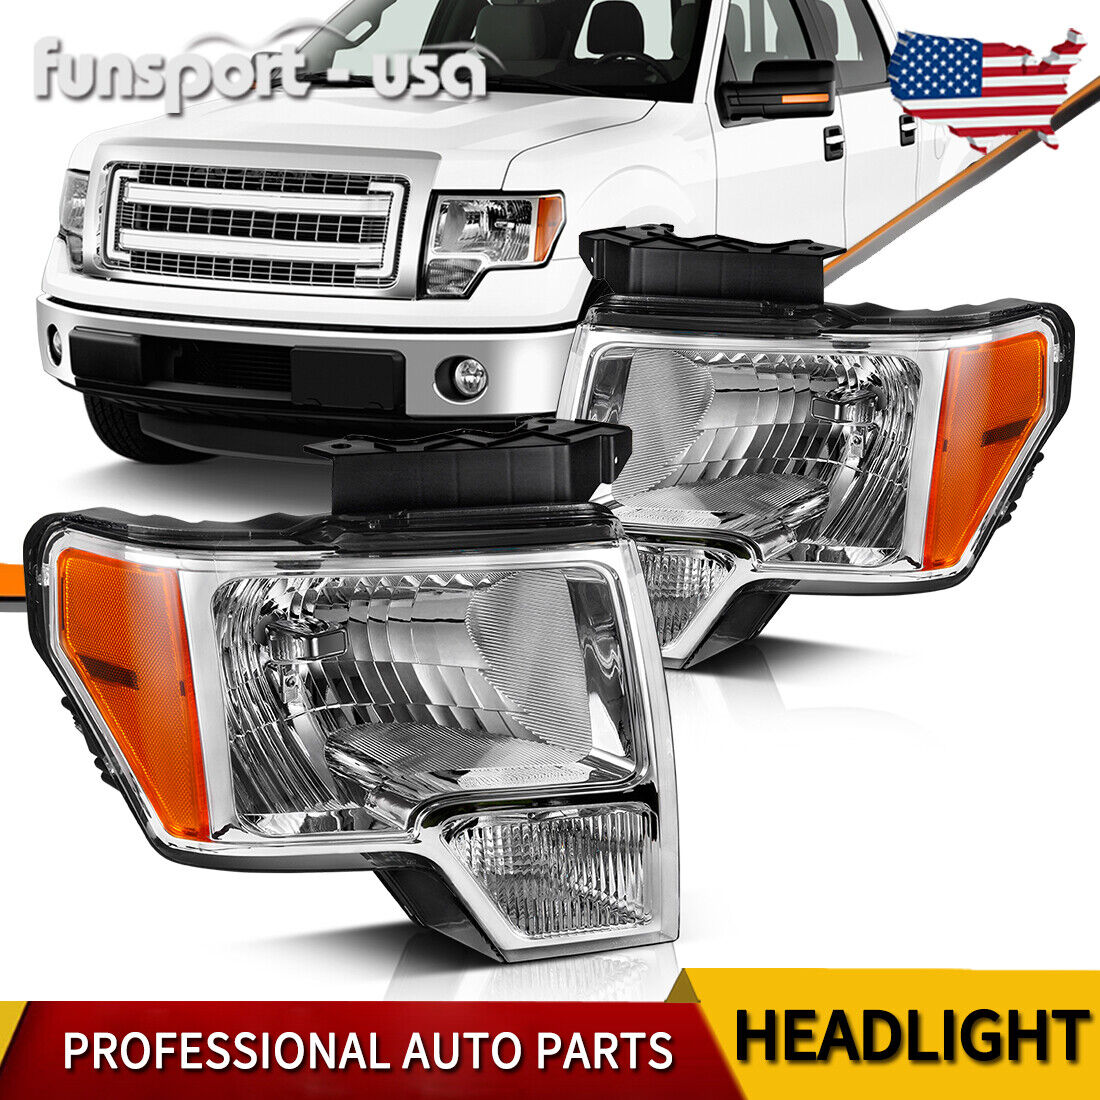 Chrome Headlights Fits For 2009-2014 Ford F150 F-150 Pickup Headlamps Left+Right